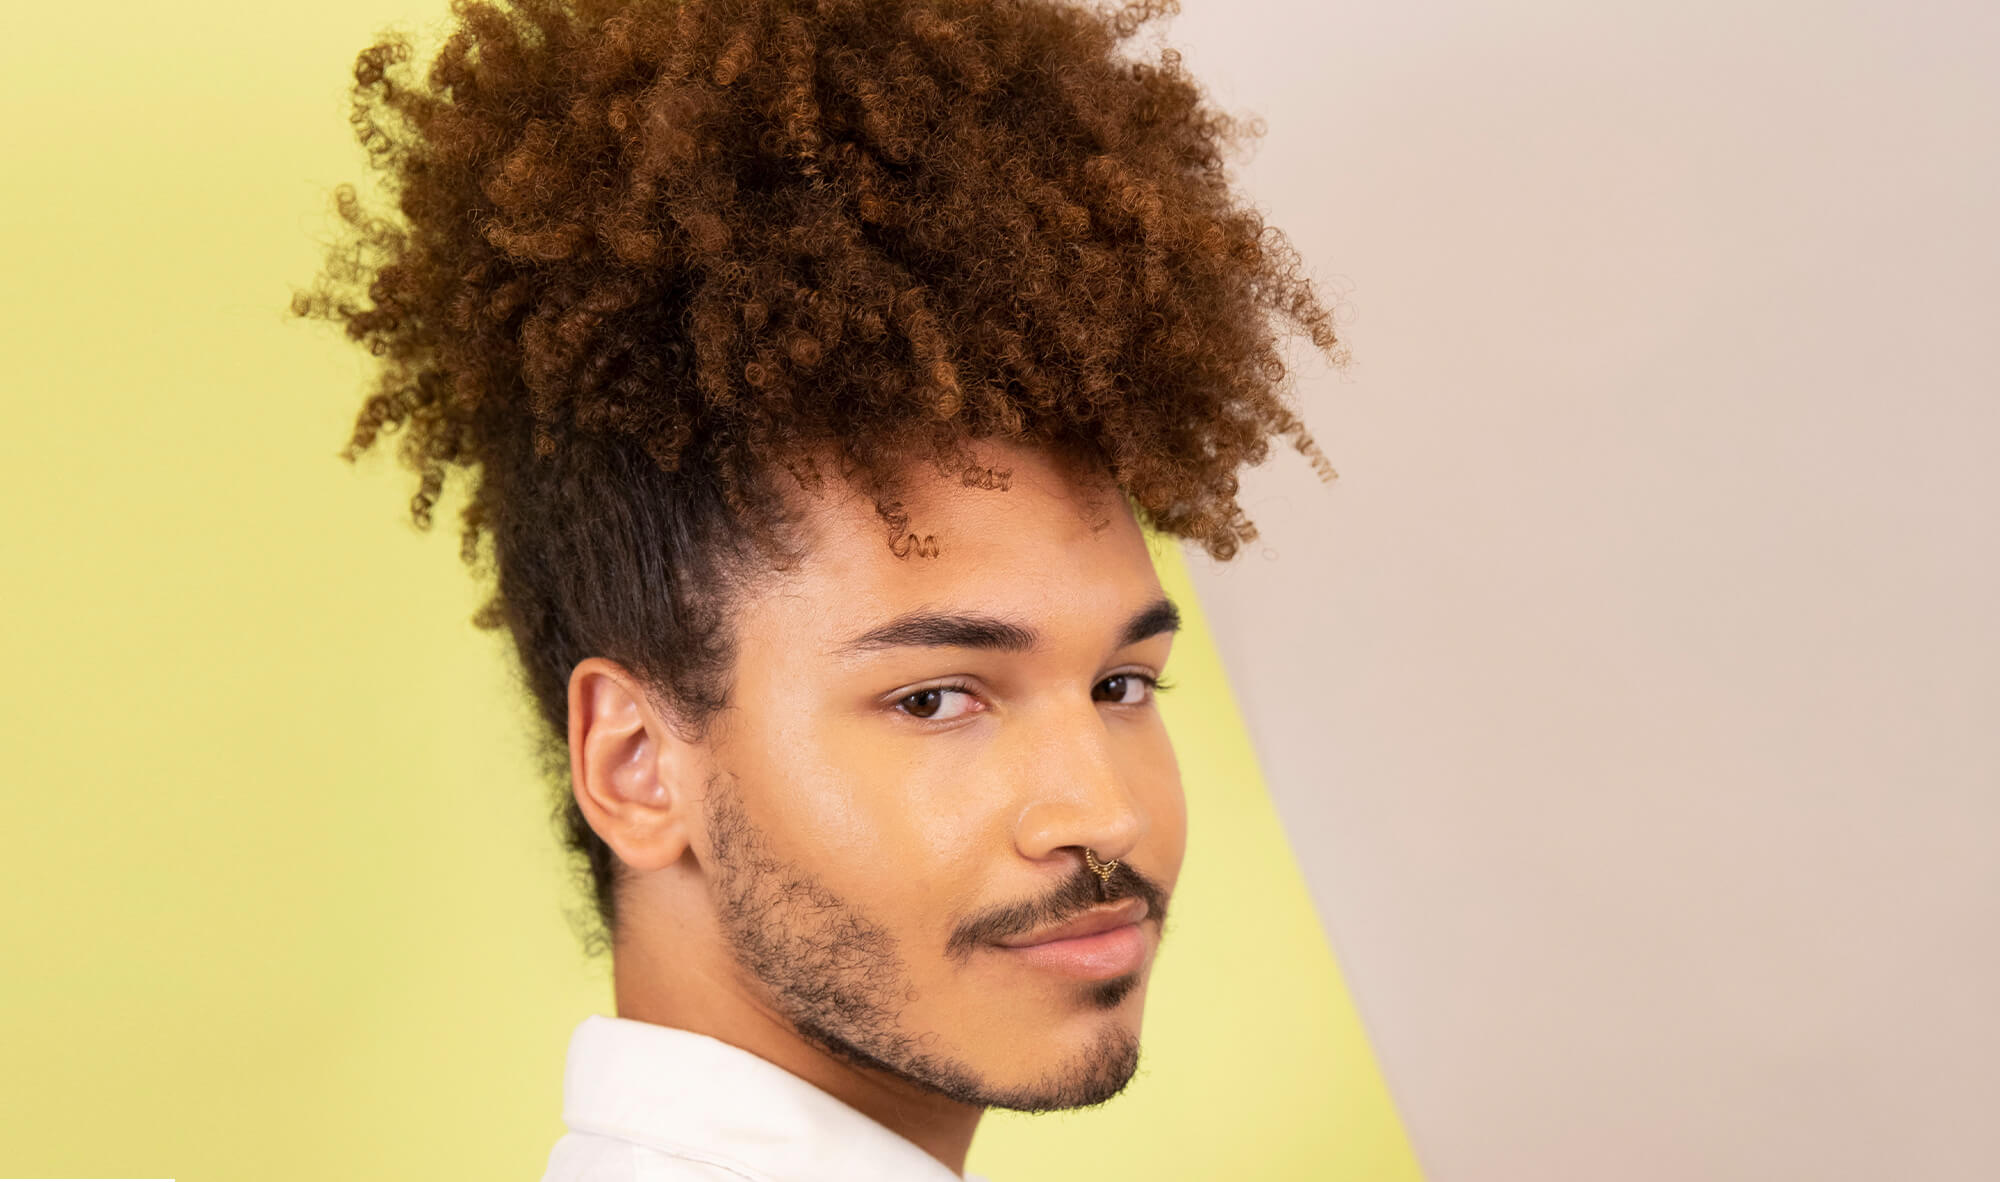 All About Pineappling Curly Hair | DevaCurl Blog